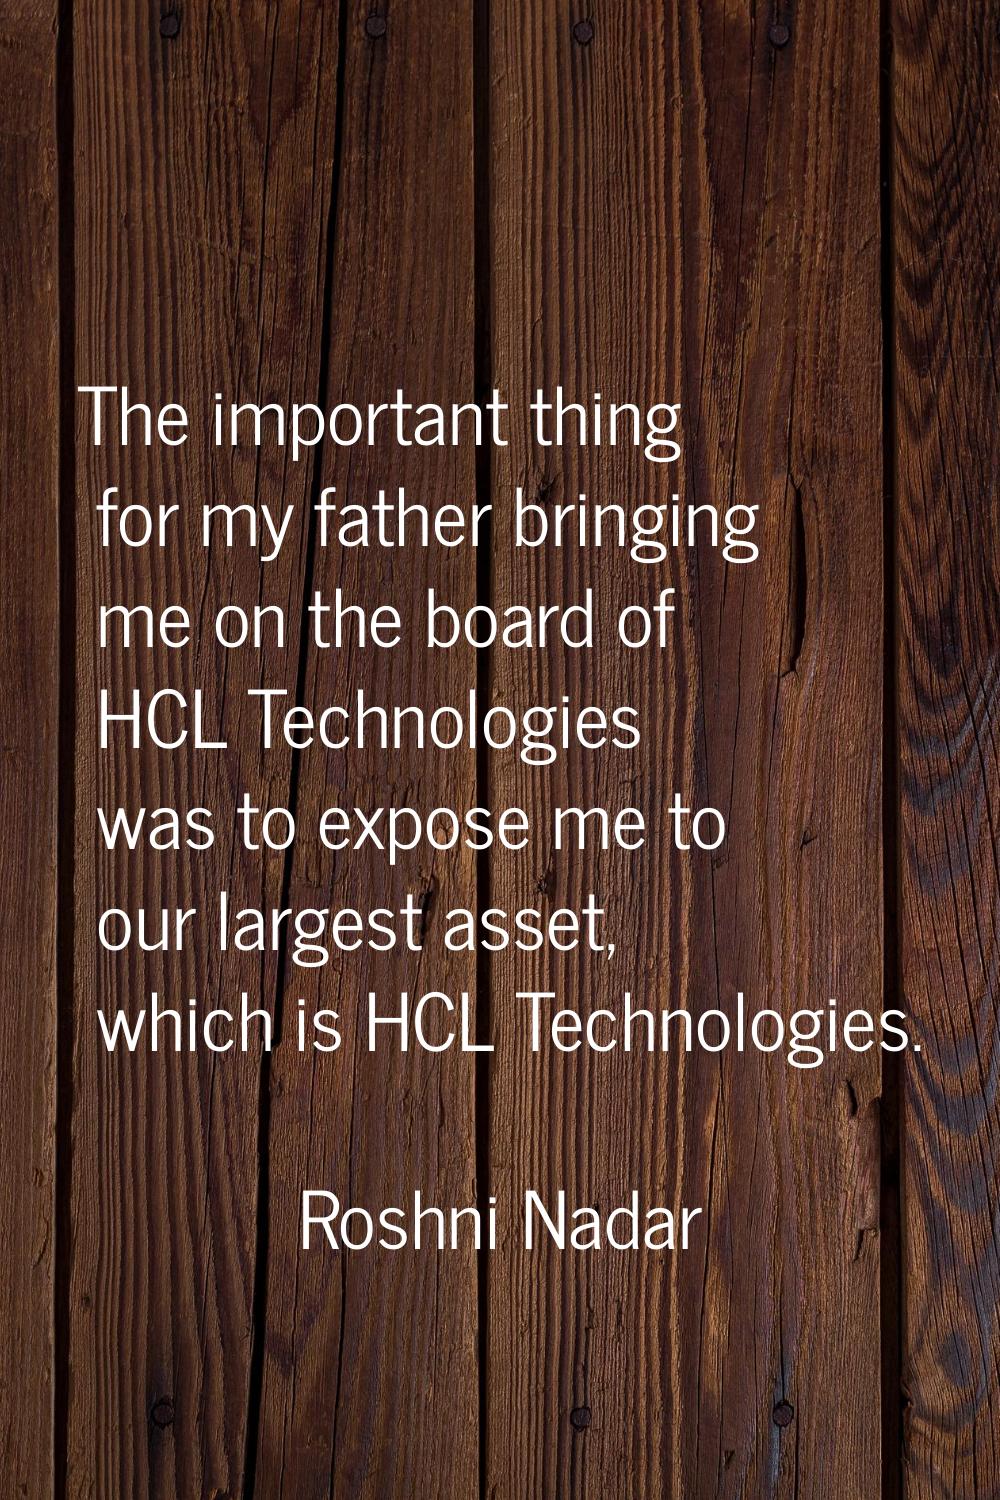 The important thing for my father bringing me on the board of HCL Technologies was to expose me to 